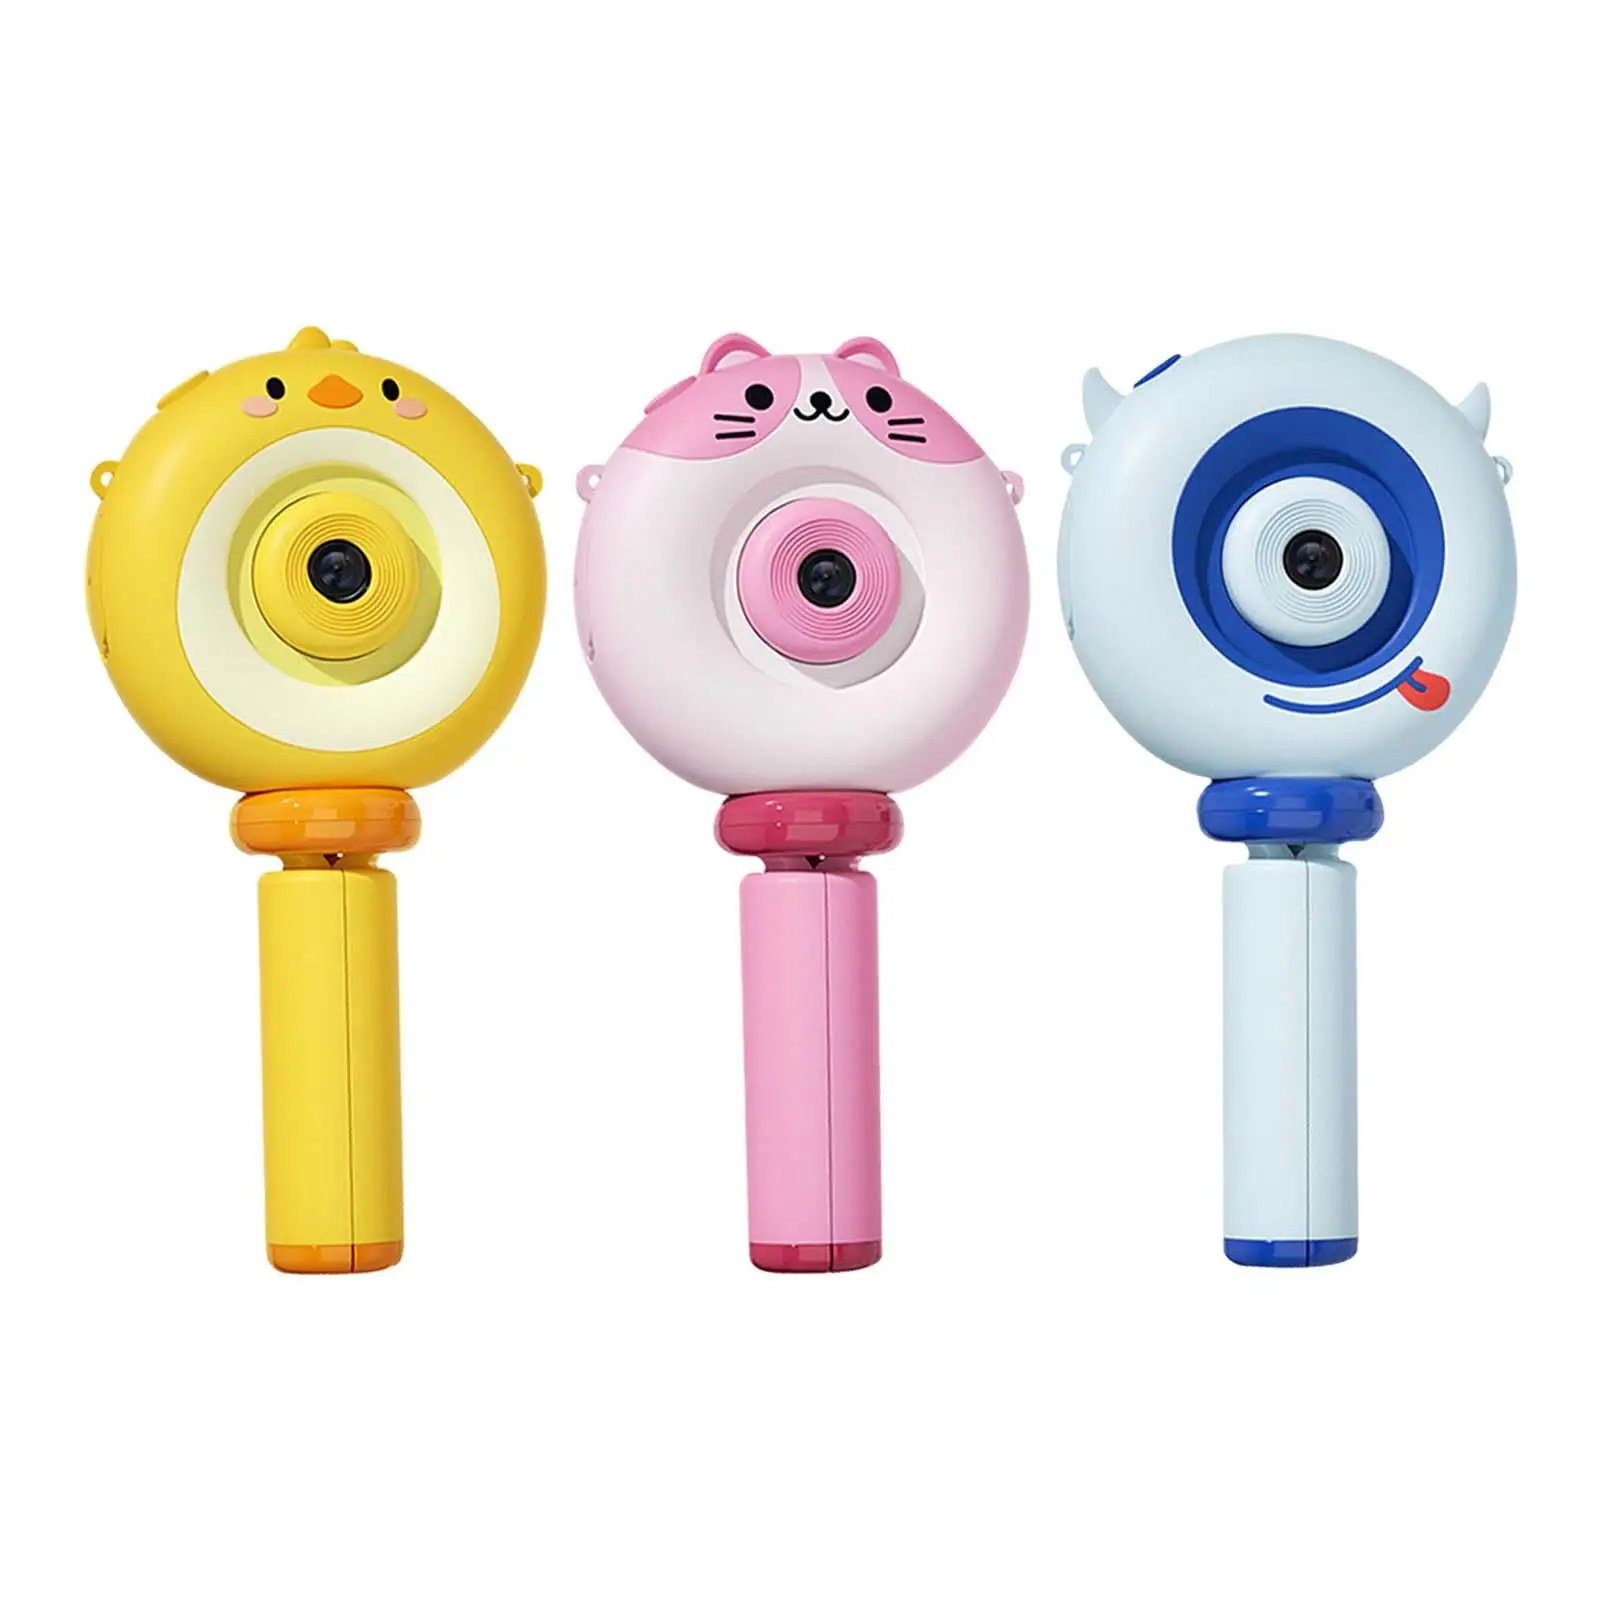 Kids Selfie Camera Resolution 1920x1080 for Age 3-9 Boys Girls Rechargeable Birthday Gift Valentines Day Gifts Portable Toy